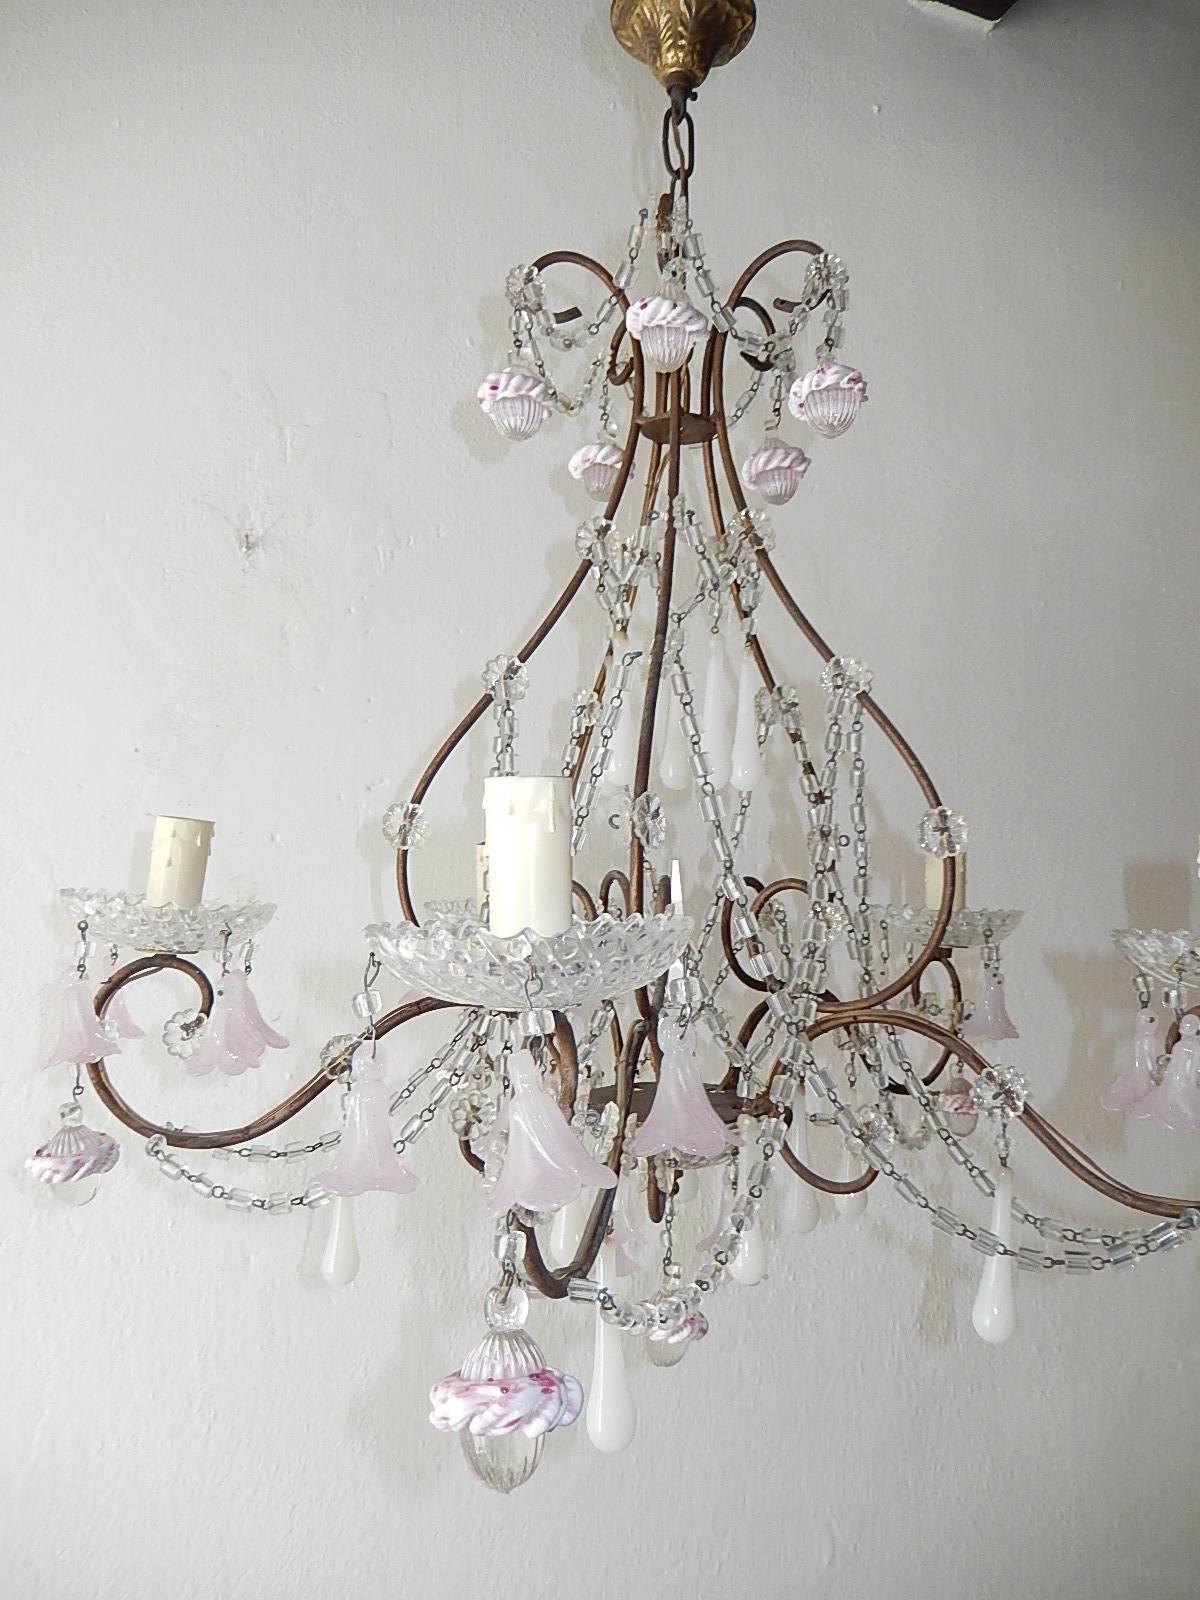 Rewired and ready to hang. Housing five lights, sitting in rare crystal bobeches dripping with pink opaline Murano flowers. Swags of macaroni beads and florets throughout. Adorning white Murano drops and clear oval drops with pink ribbon encircling.